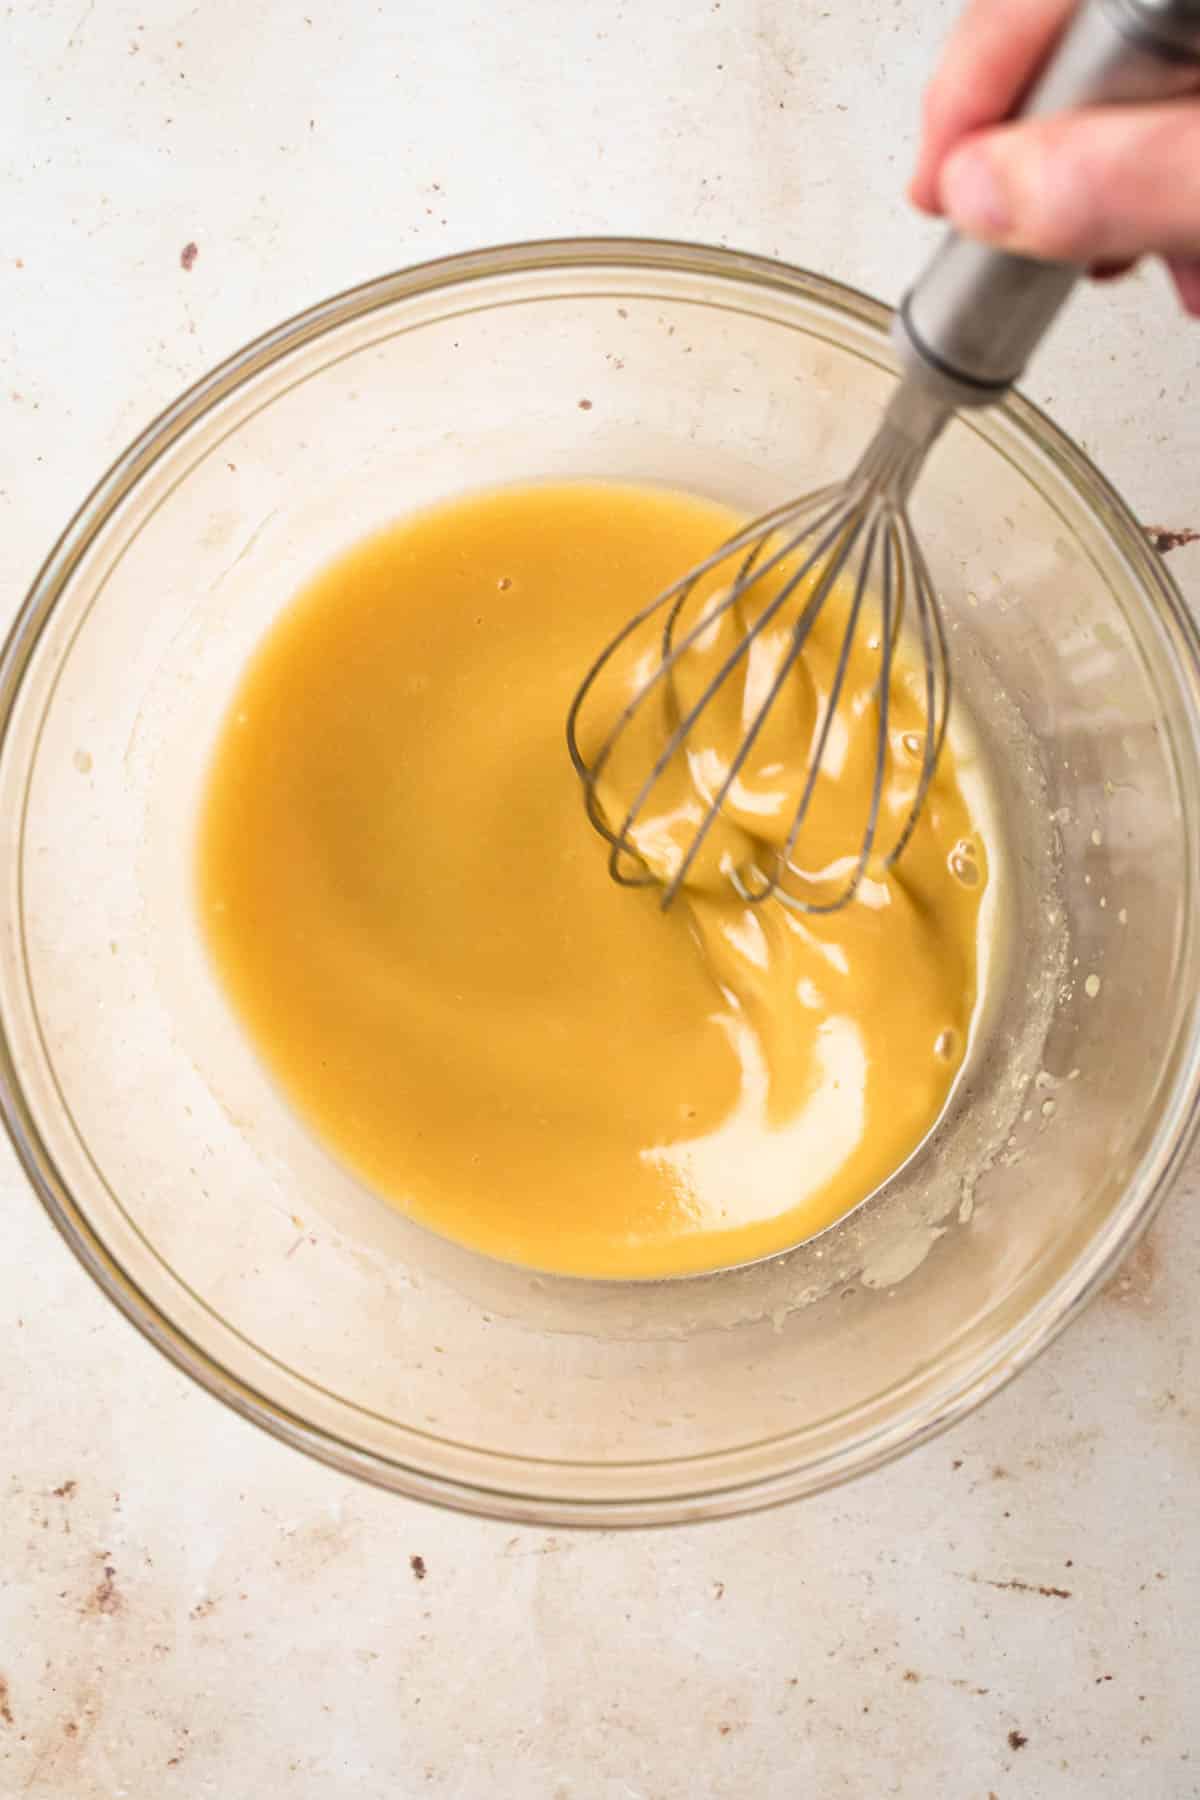 Maple dijon salad dressing whisked together in a medium glass mixing bowl.